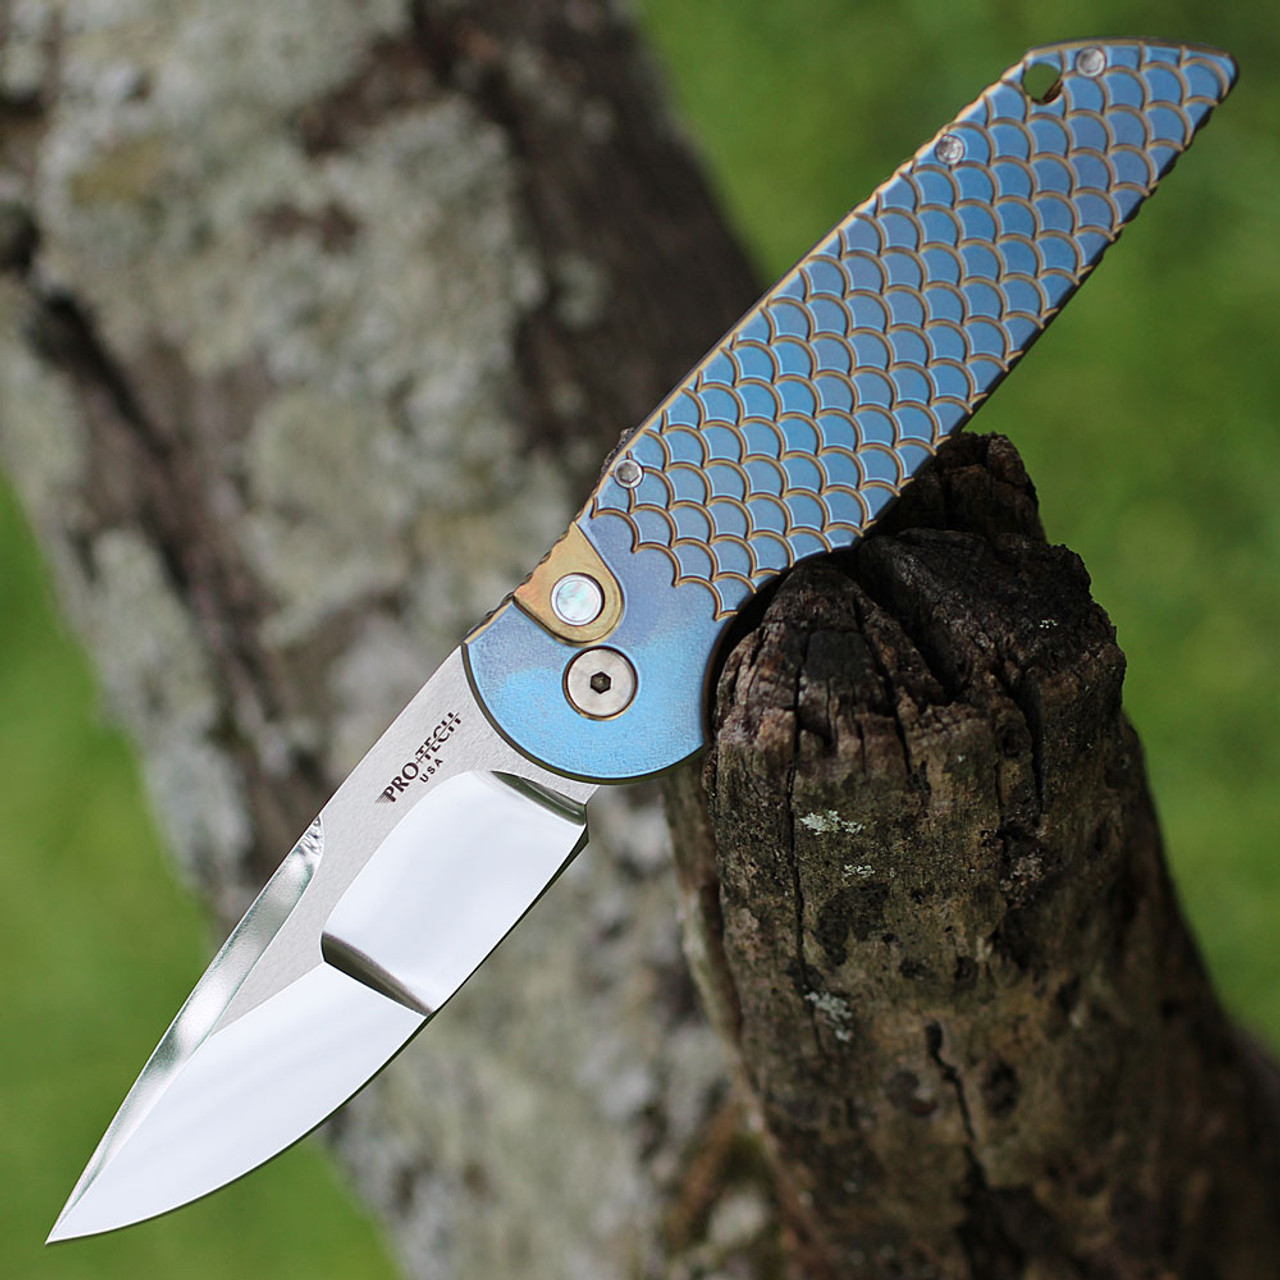 Pro-Tech 2022 Custom Tactical Response 3 (2022Custom008) 3.5" Mirror Polished CPM-154CM Drop Point Plain Blade, Compund Ground by Mike Irie, Two-Toned Bronze Chamfers with Orange Peel Blue Flats Titanium Fish Scale Handle, Pearl Push Button